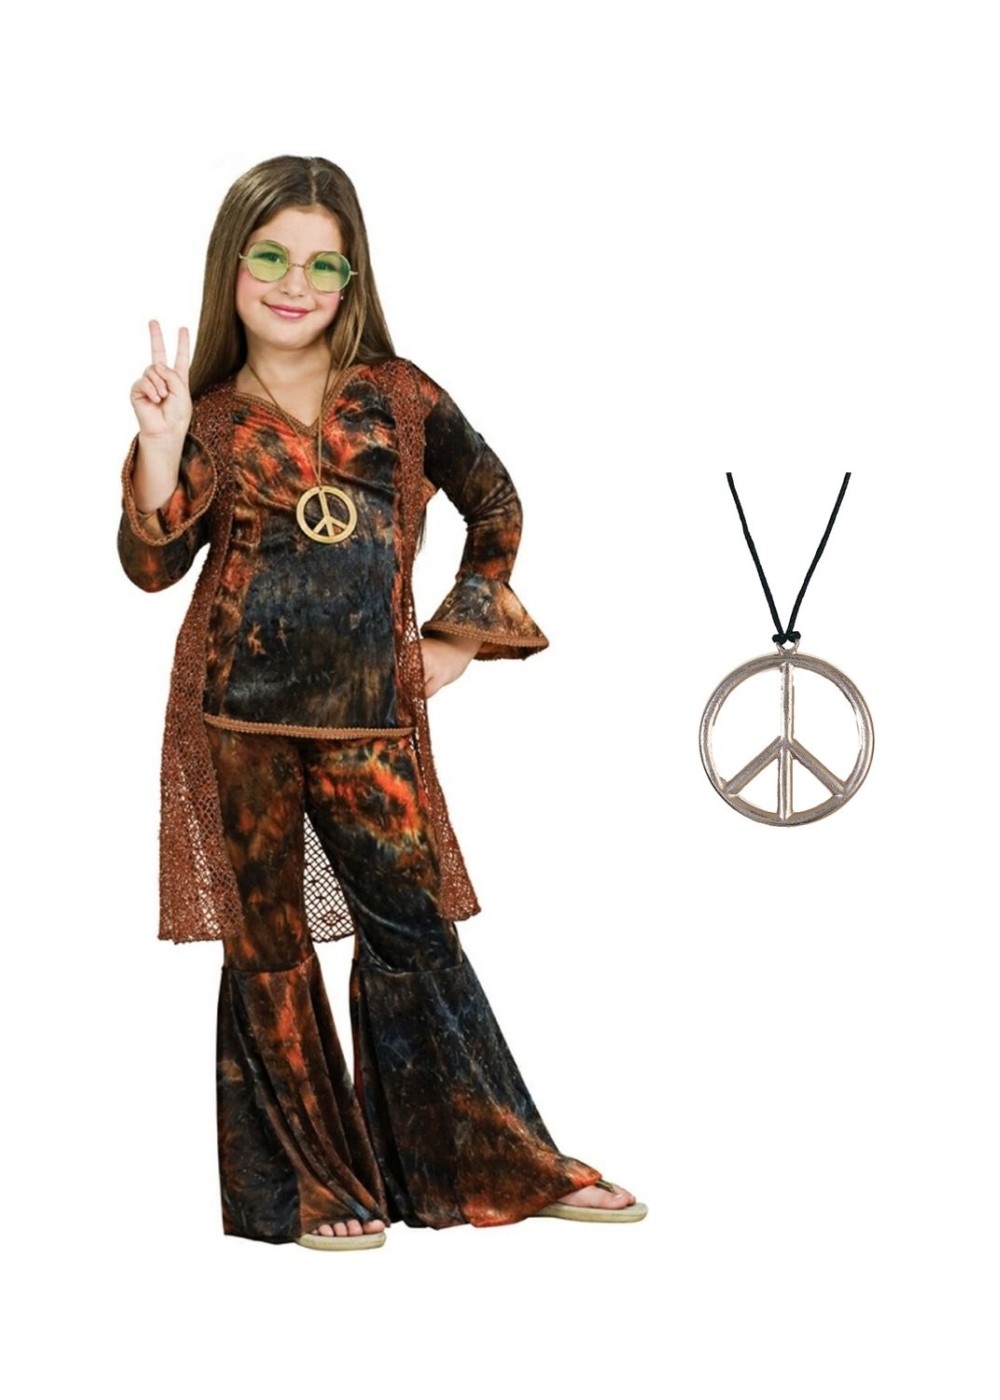 Kids Woodstock Girls Costume And Peace Medal Necklace